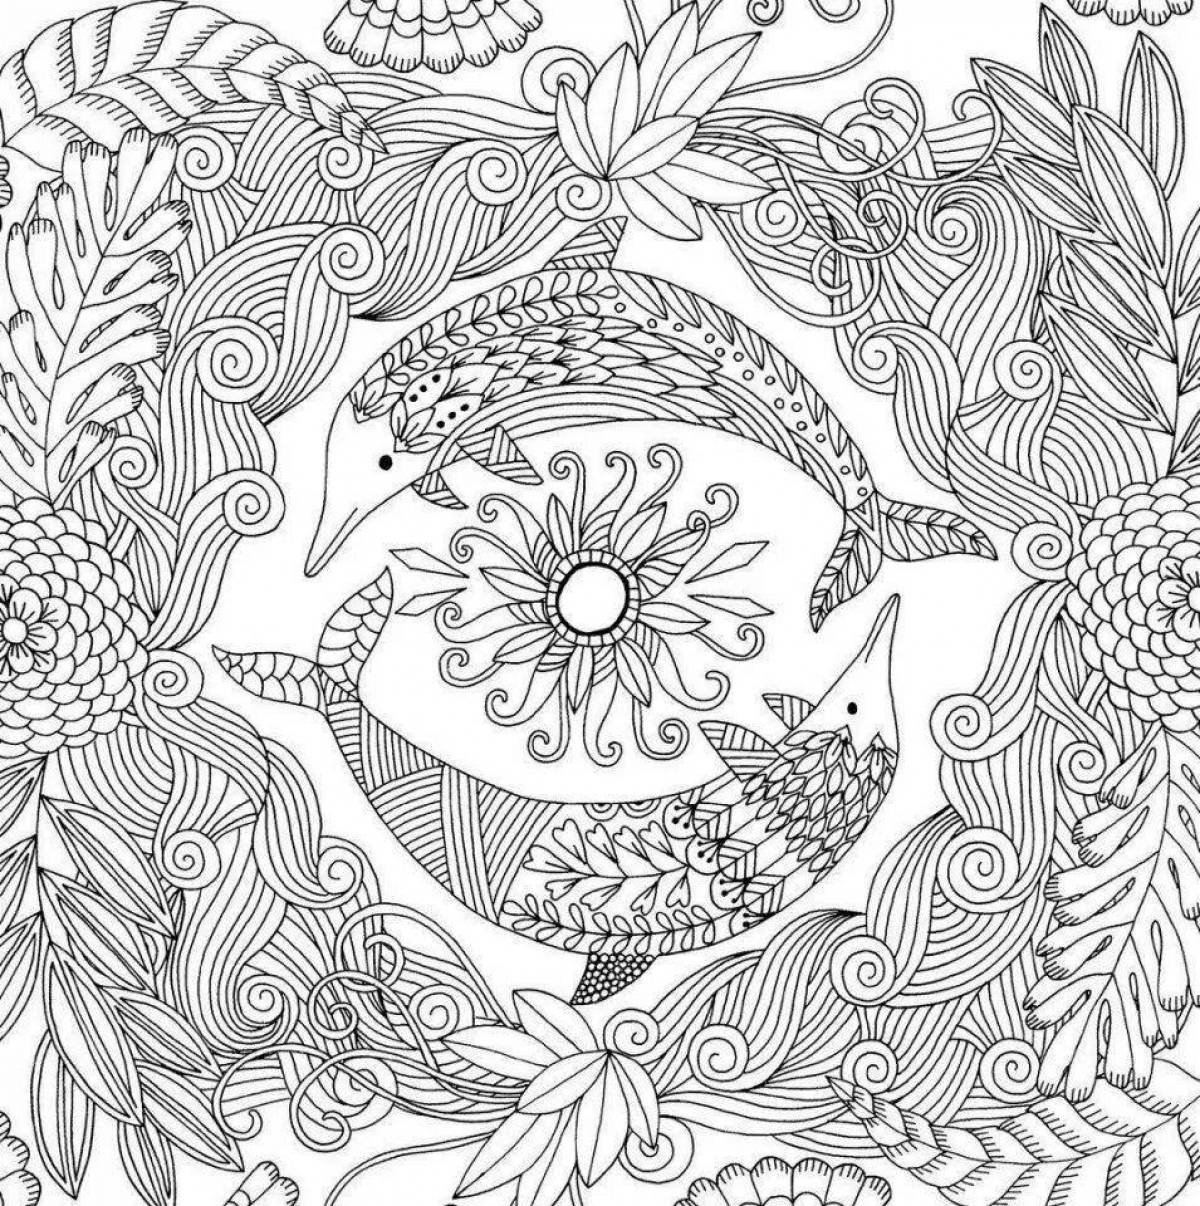 Soothing stress coloring book